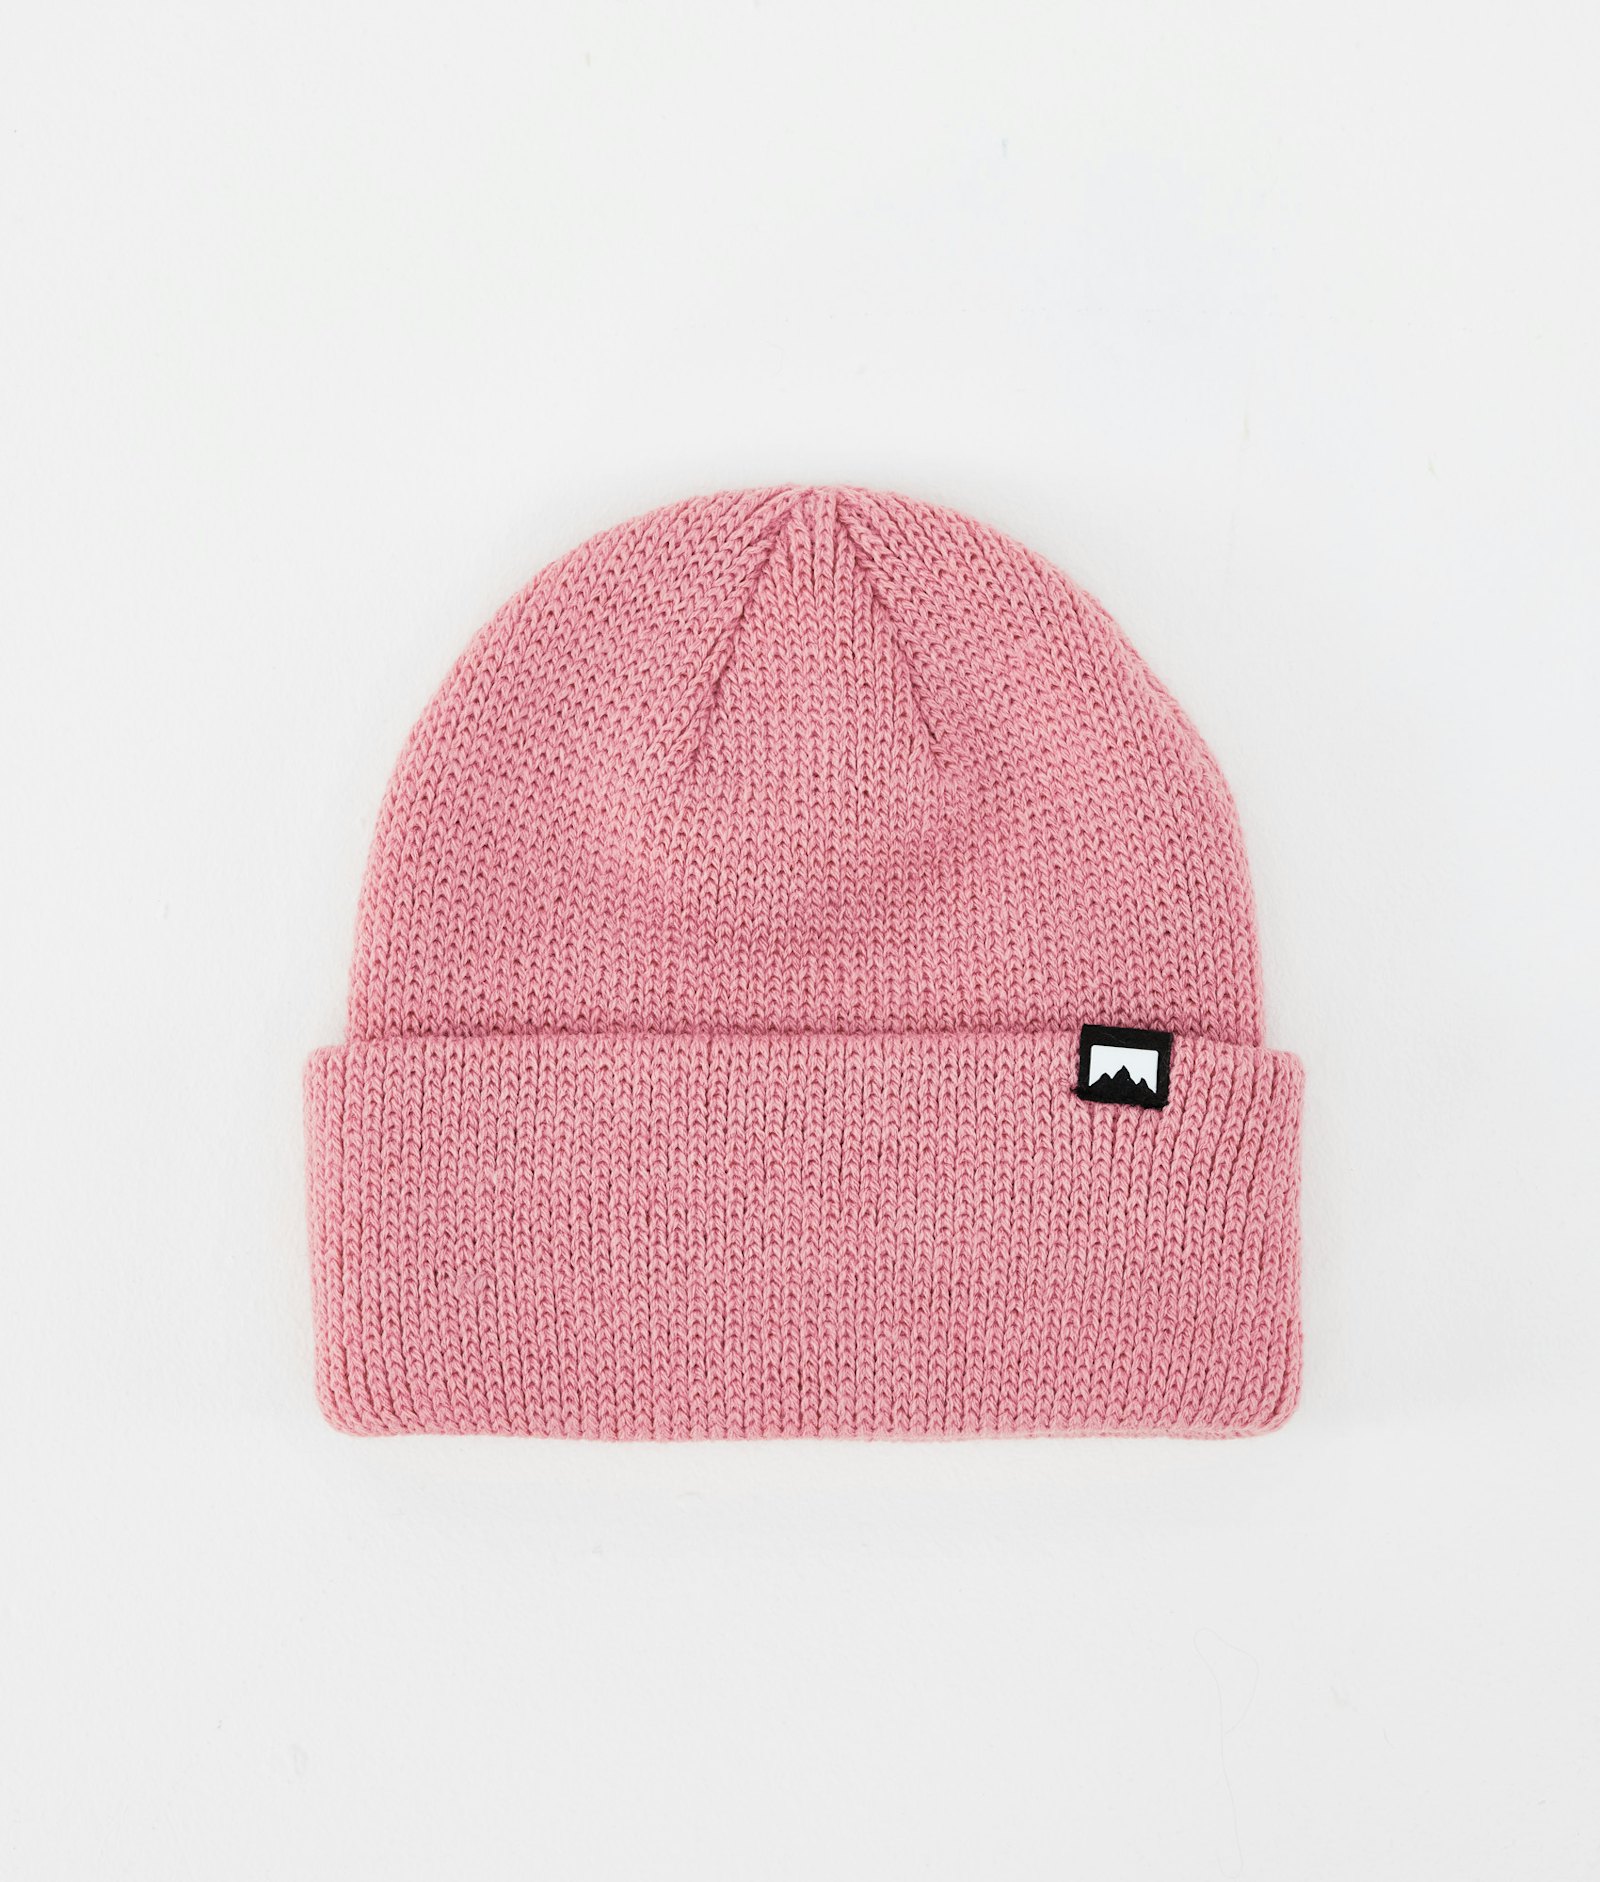 Ice 2021 Beanie Pink, Image 1 of 3